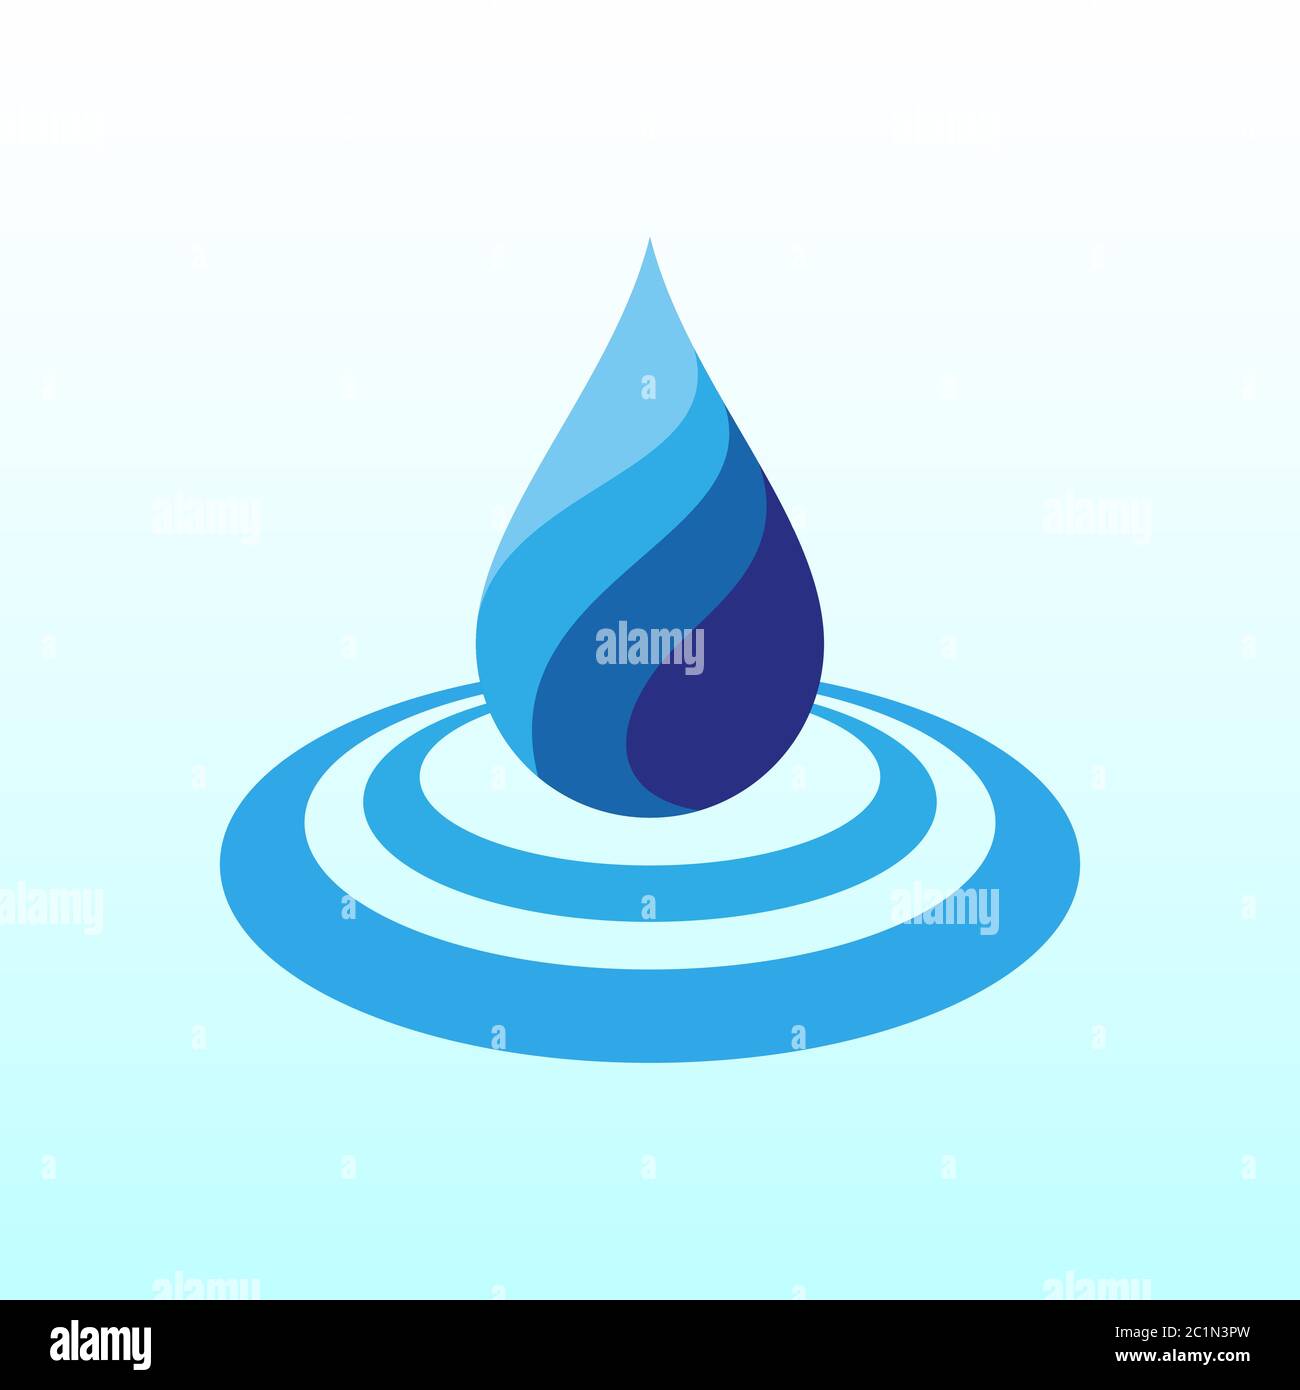 Vector illustration of a refreshing water drop icon with ripple wave. Suitable for clean water campaigns, natural and healthy sources of life. Stock Vector